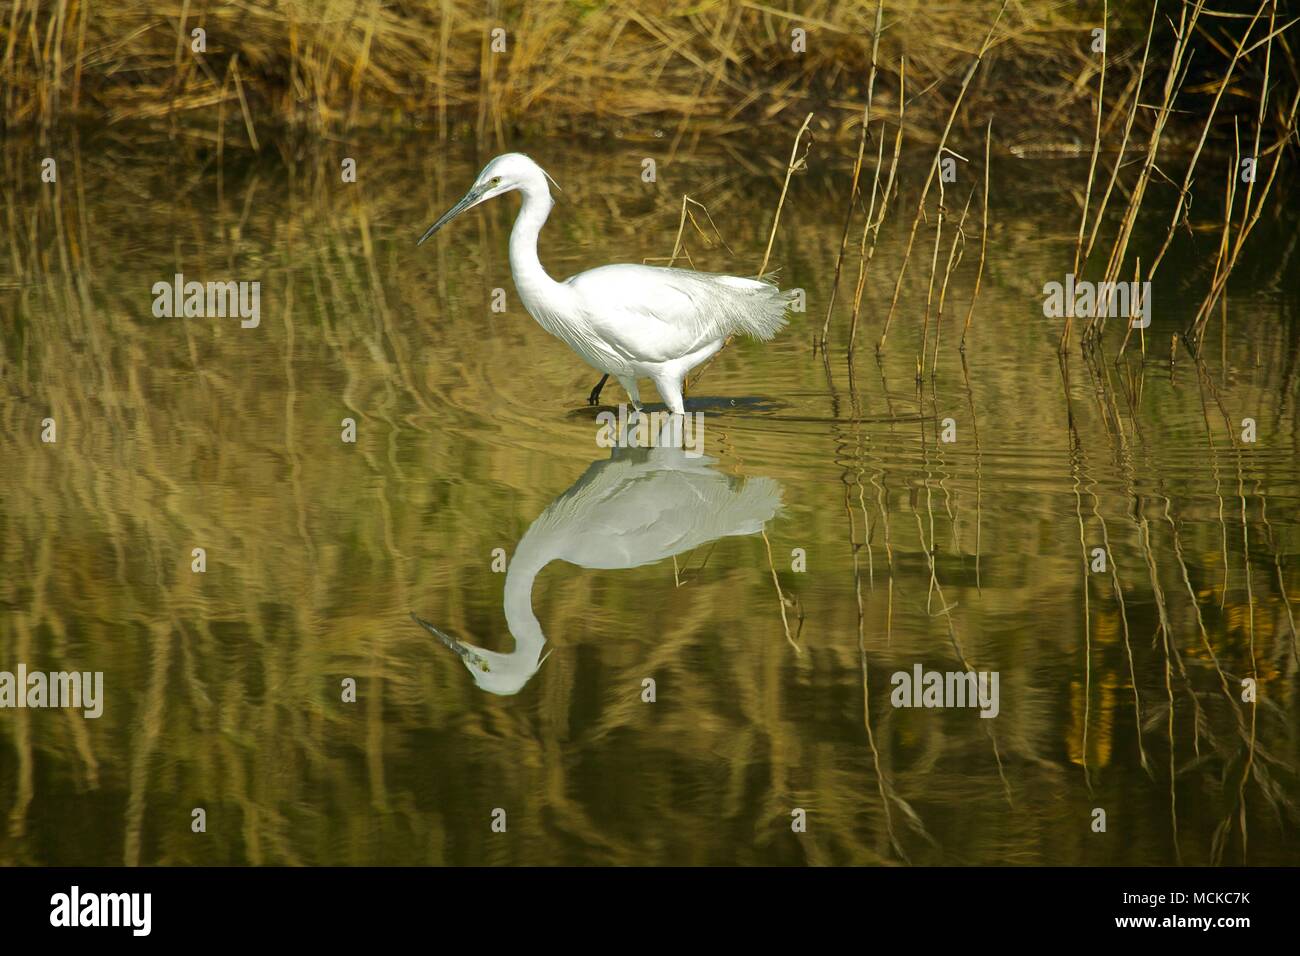 a little White Egret with reflection feeding in reed beds at Lymington Marshes, New Forest, UK Stock Photo